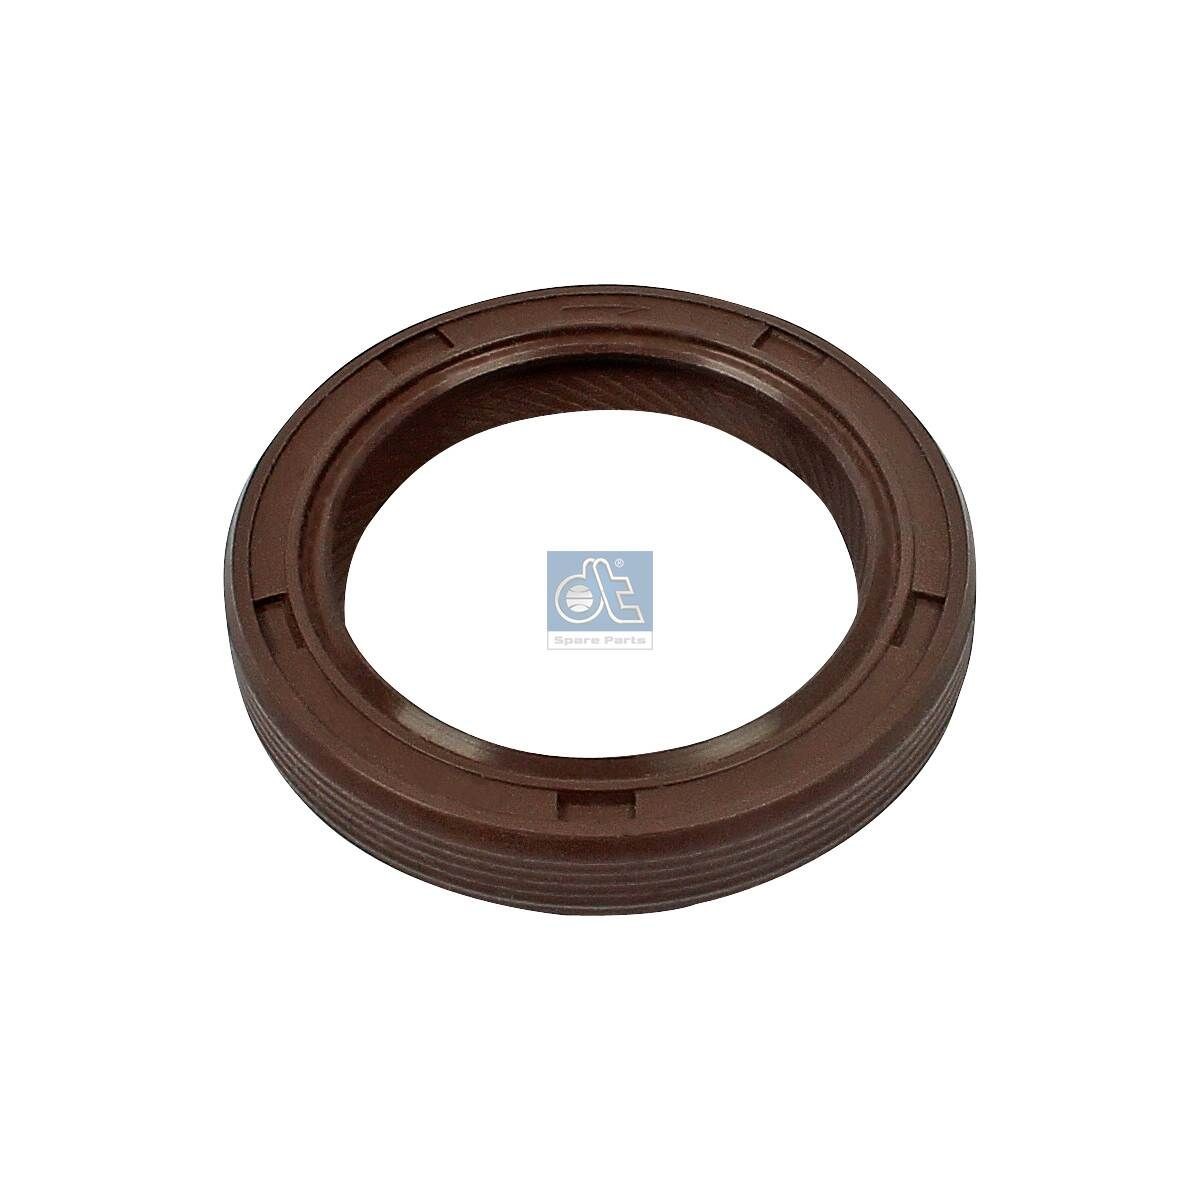 Opel VECTRA Camshaft seal DT Spare Parts 6.60314 cheap